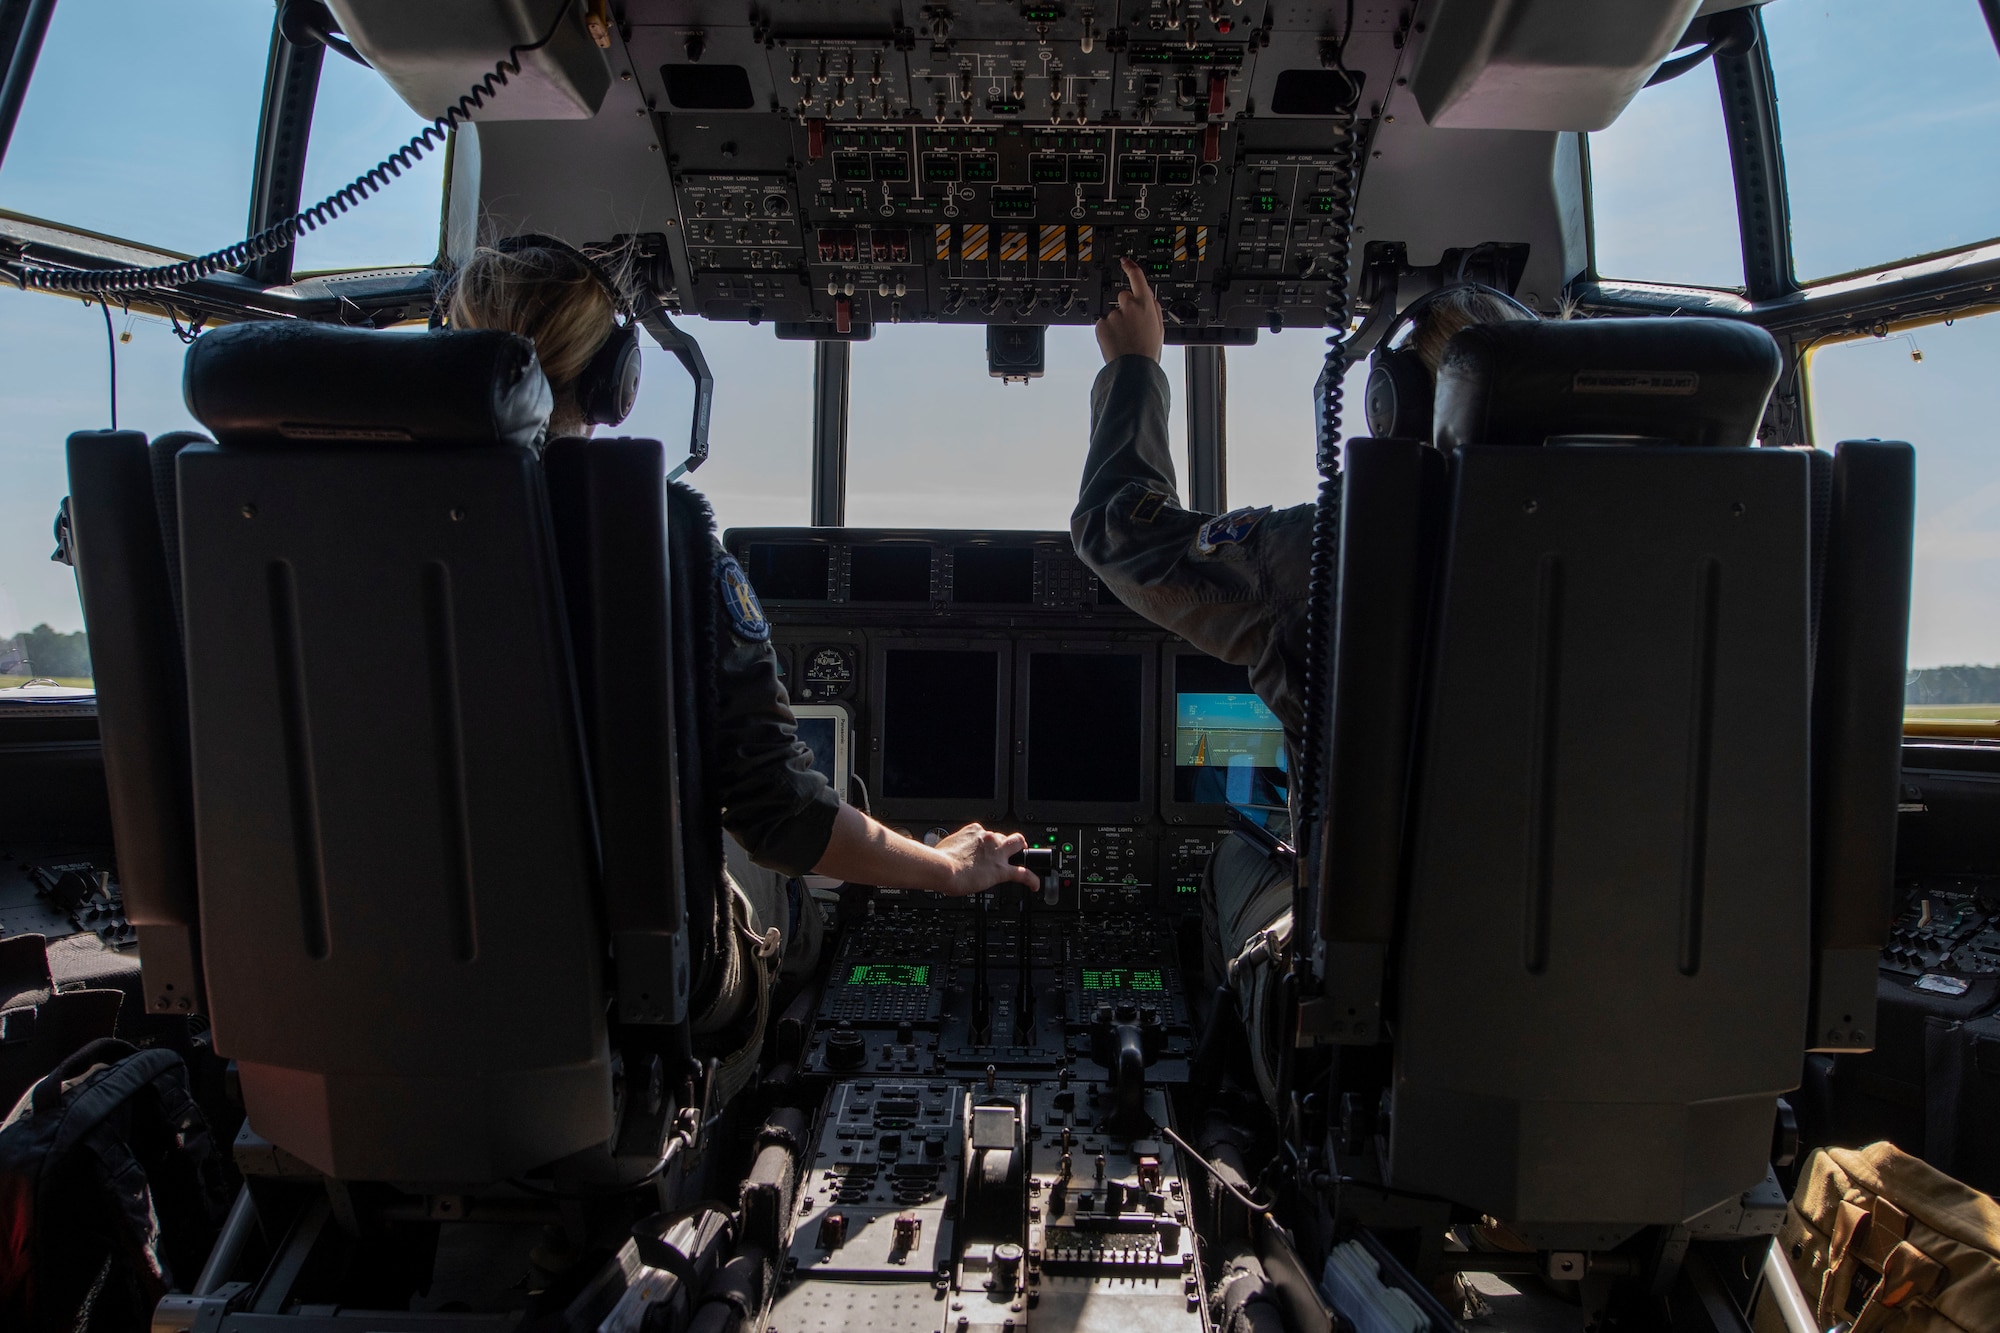 Capt. Leslie Weisz, 71st Rescue Squadron (RQS) pilot, initiates takeoff in an HC-130J Combat King II during the airframe’s first flight to be operated by an all-female aircrew Sept. 6, 2019, at Moody Air Force Base, Ga. The 71st RQS provides rapidly deployable, expeditionary personnel recovery forces for theater commanders for contingency and crisis response operations worldwide. (U.S. Air Force photo by 2nd Lt. Kaylin P. Hankerson)